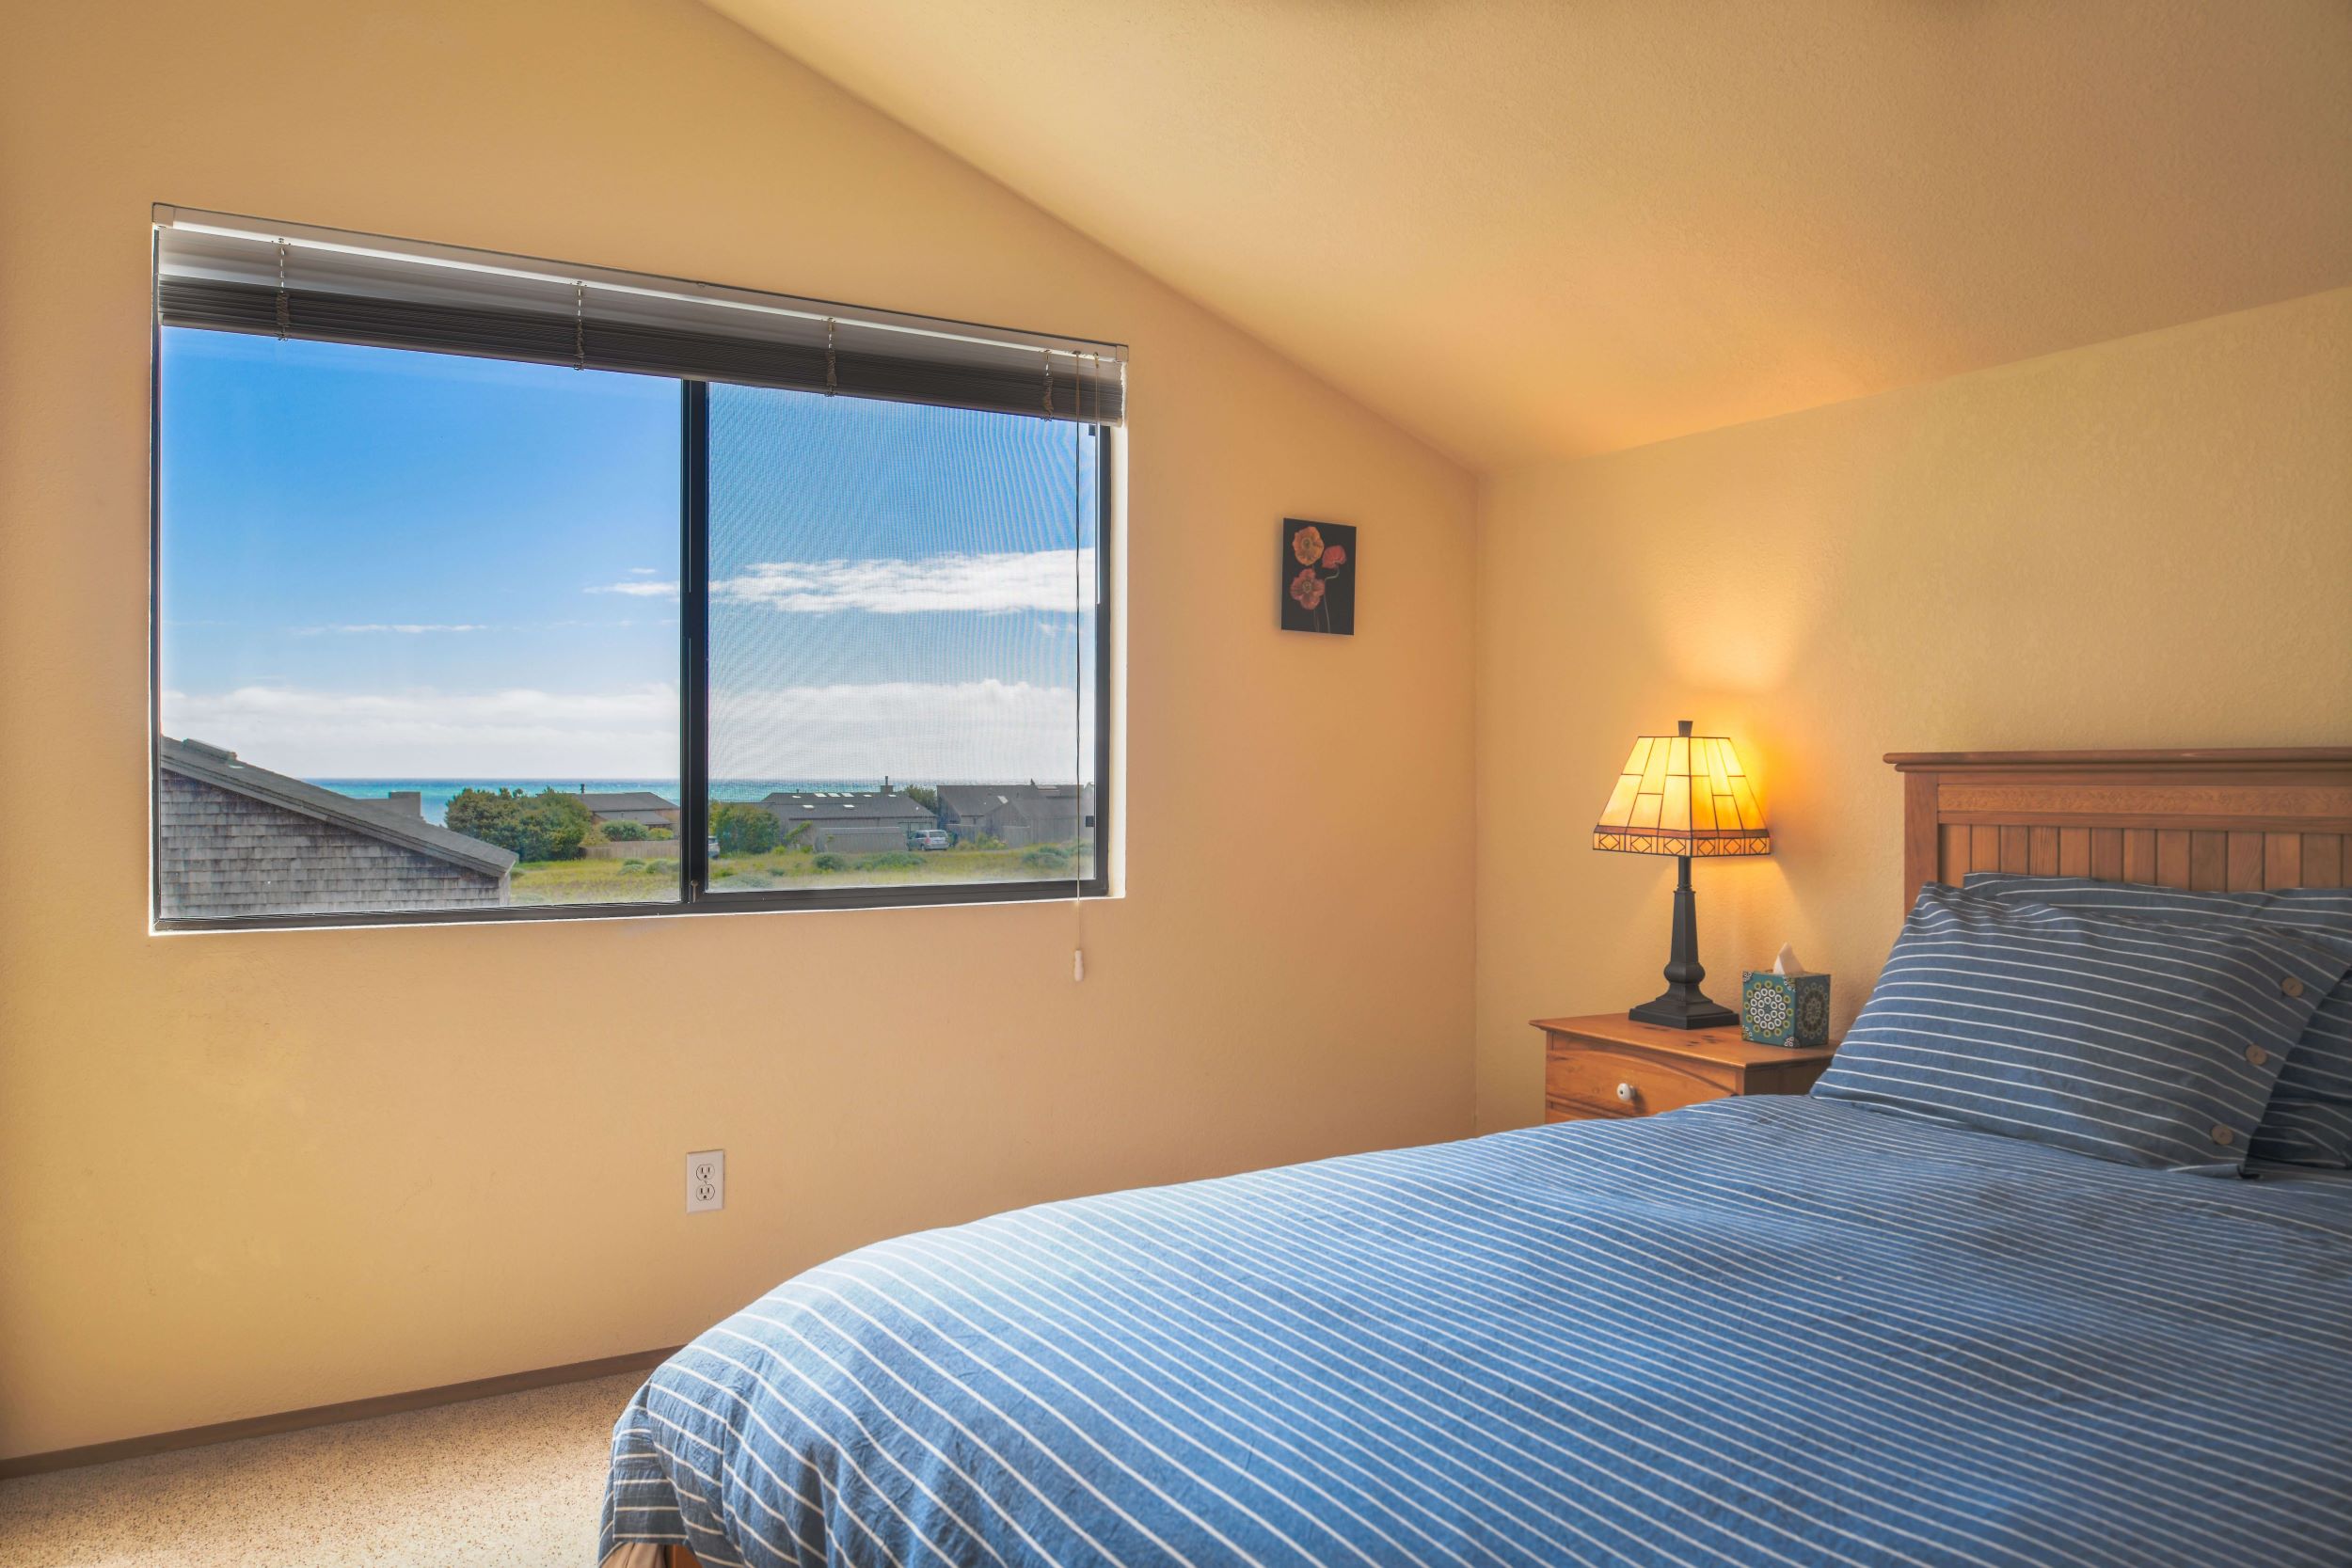 Mare Vista: small queen bedroom with bright window with ocean view.